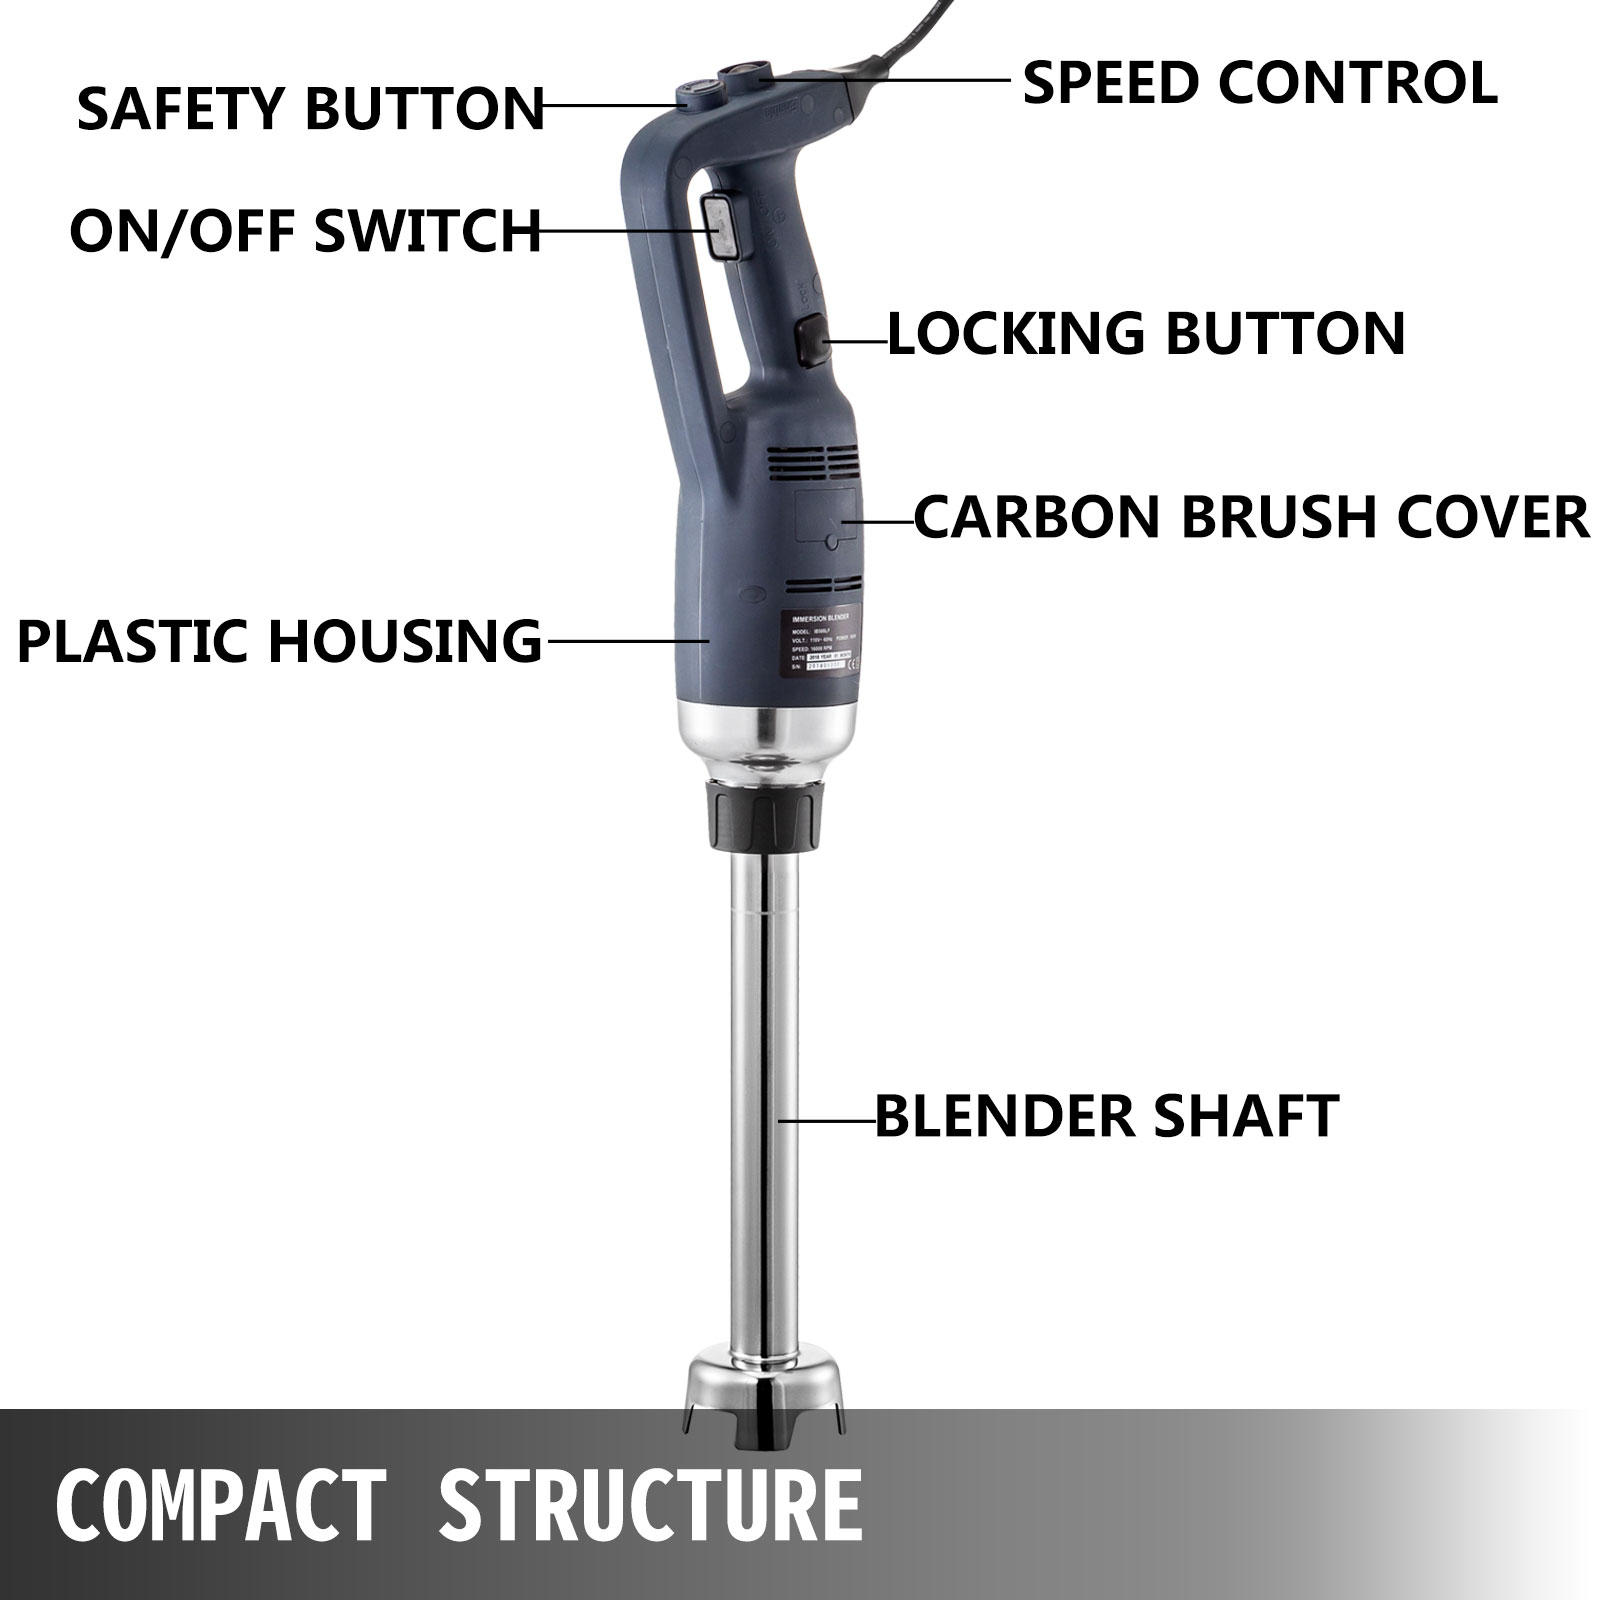 VONCI 500W Commercial Immersion Blender, 15.7 SUS 304 Removable Shaft,  Heavy Duty Power Hand Mixer with Variable Speed 6000-20000RPM, Professional